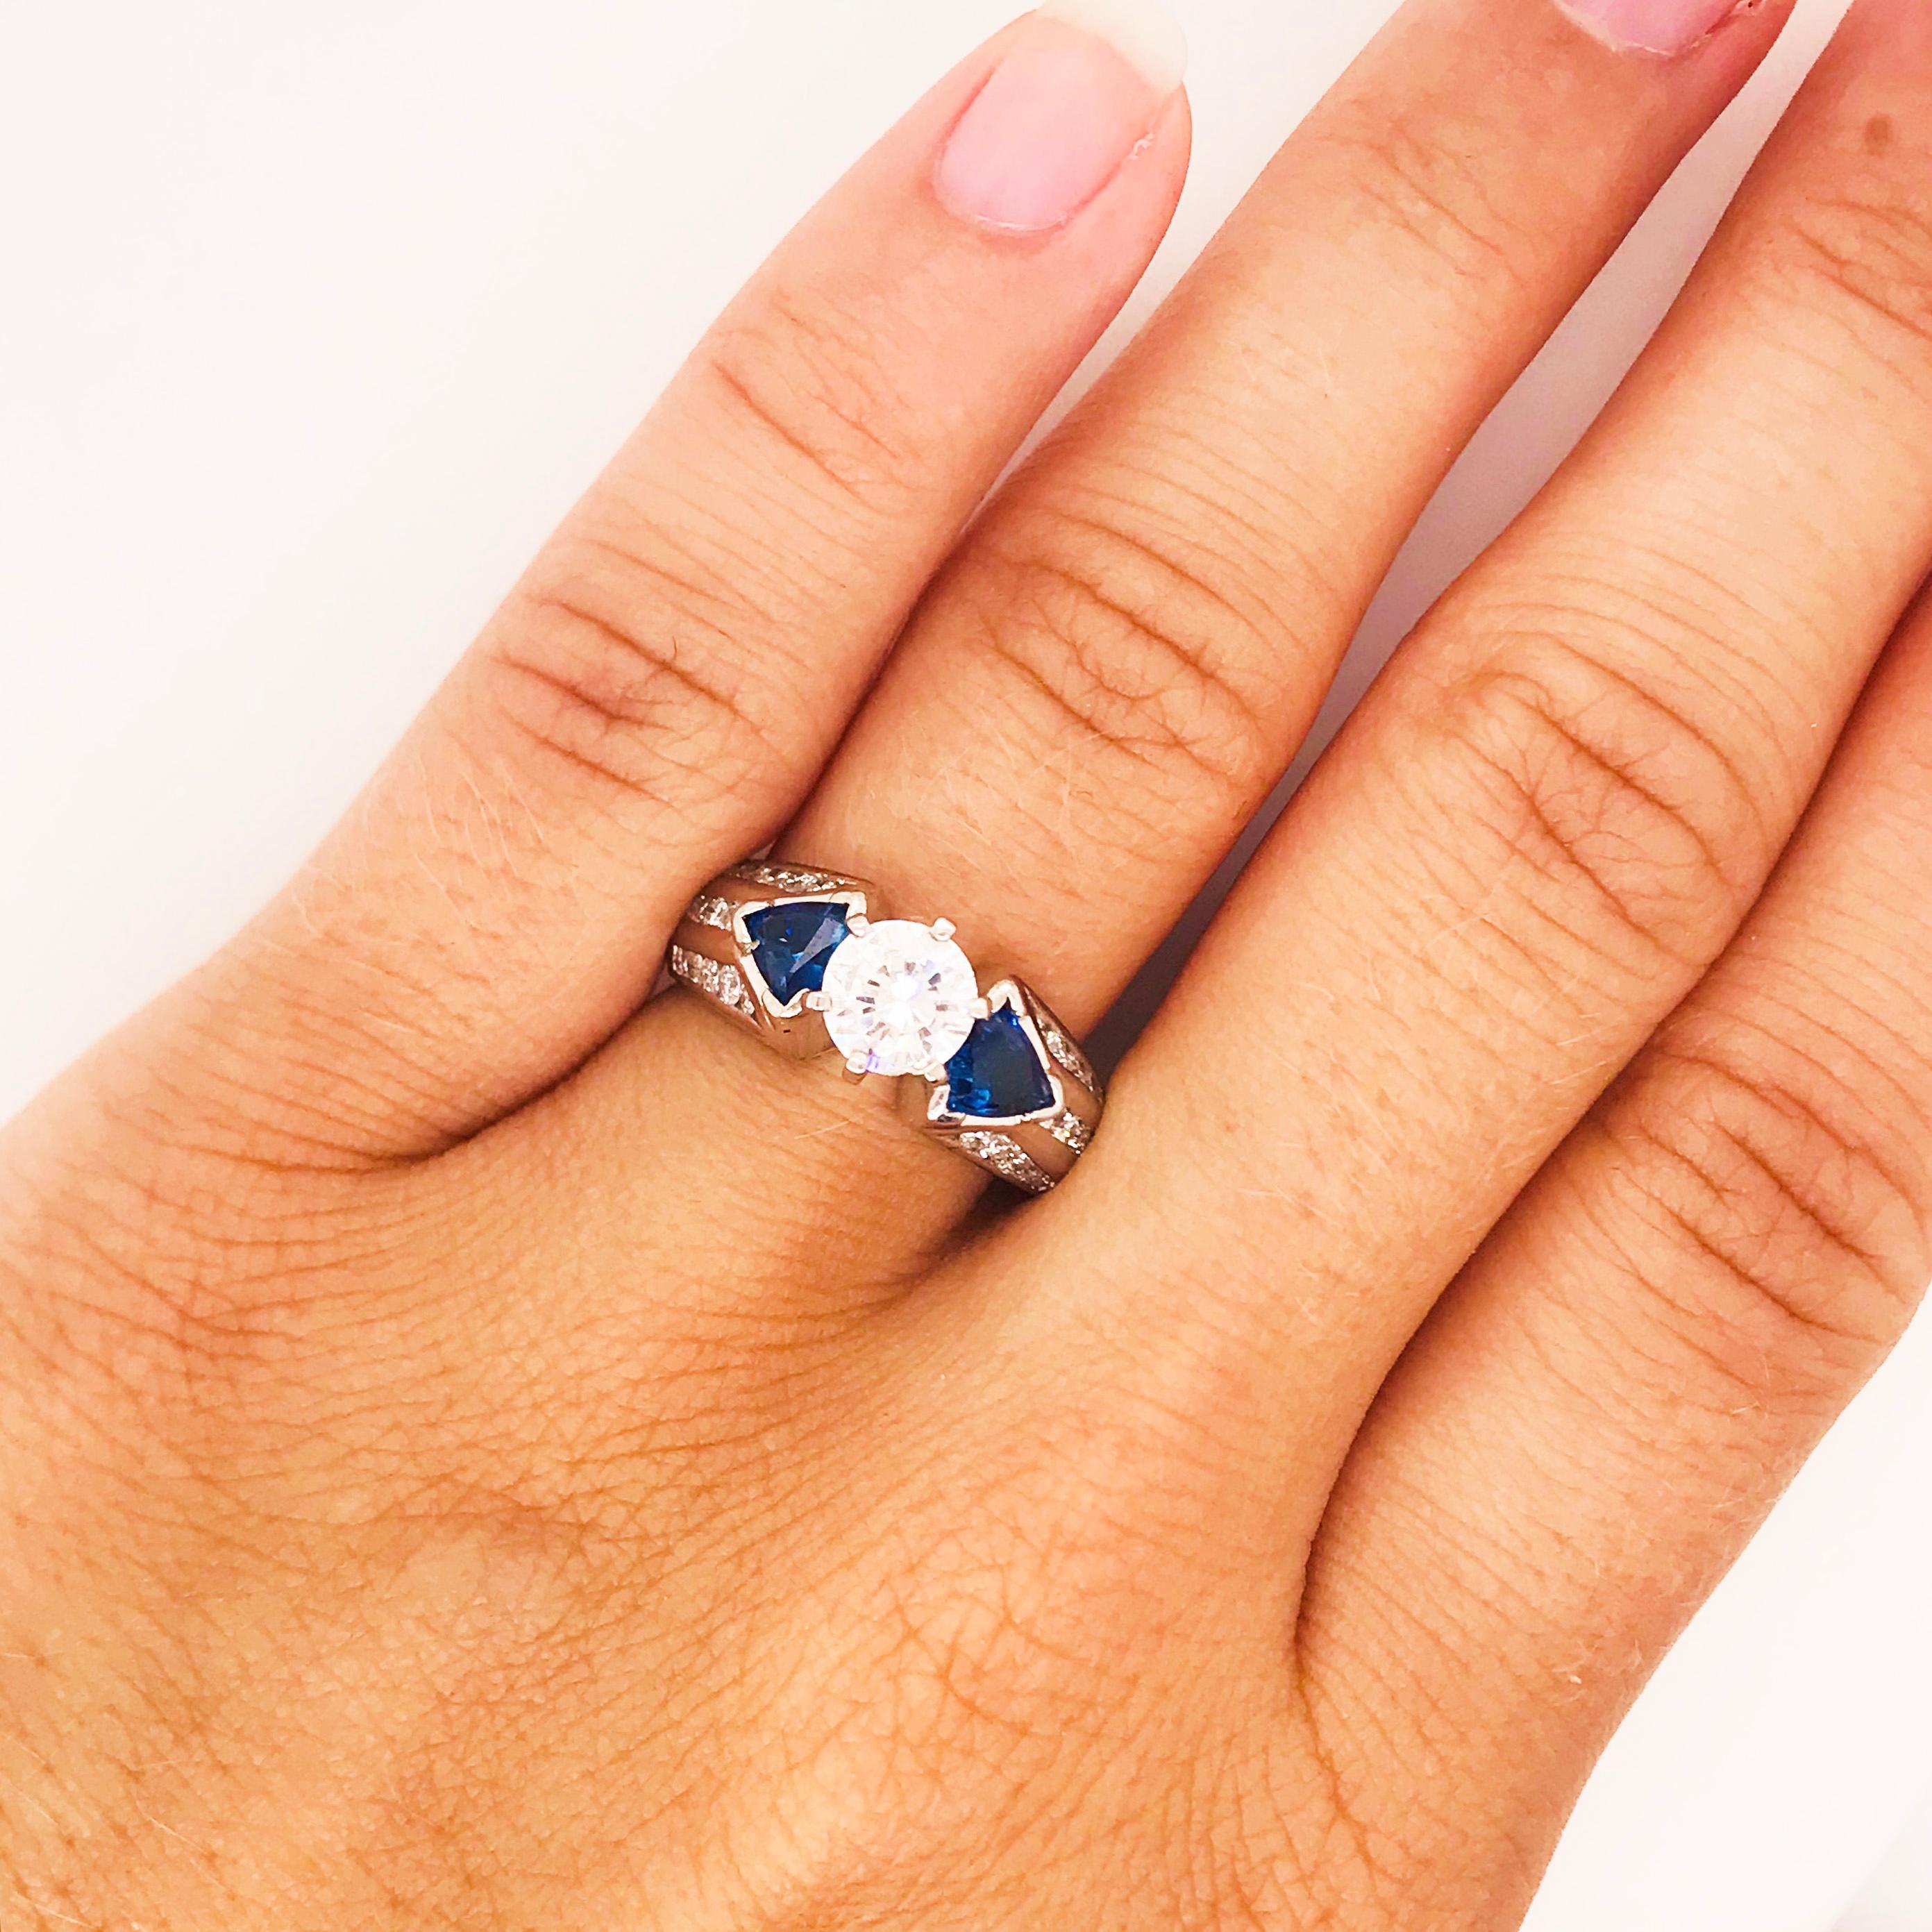 Blue, bold and beautiful! This gorgeous, timeless custom engagement ring has a round brilliant diamond center that is exactly 1.00 carat total weight! The diamond is bright white and eye clean! The engagement ring has a trillion, genuine blue